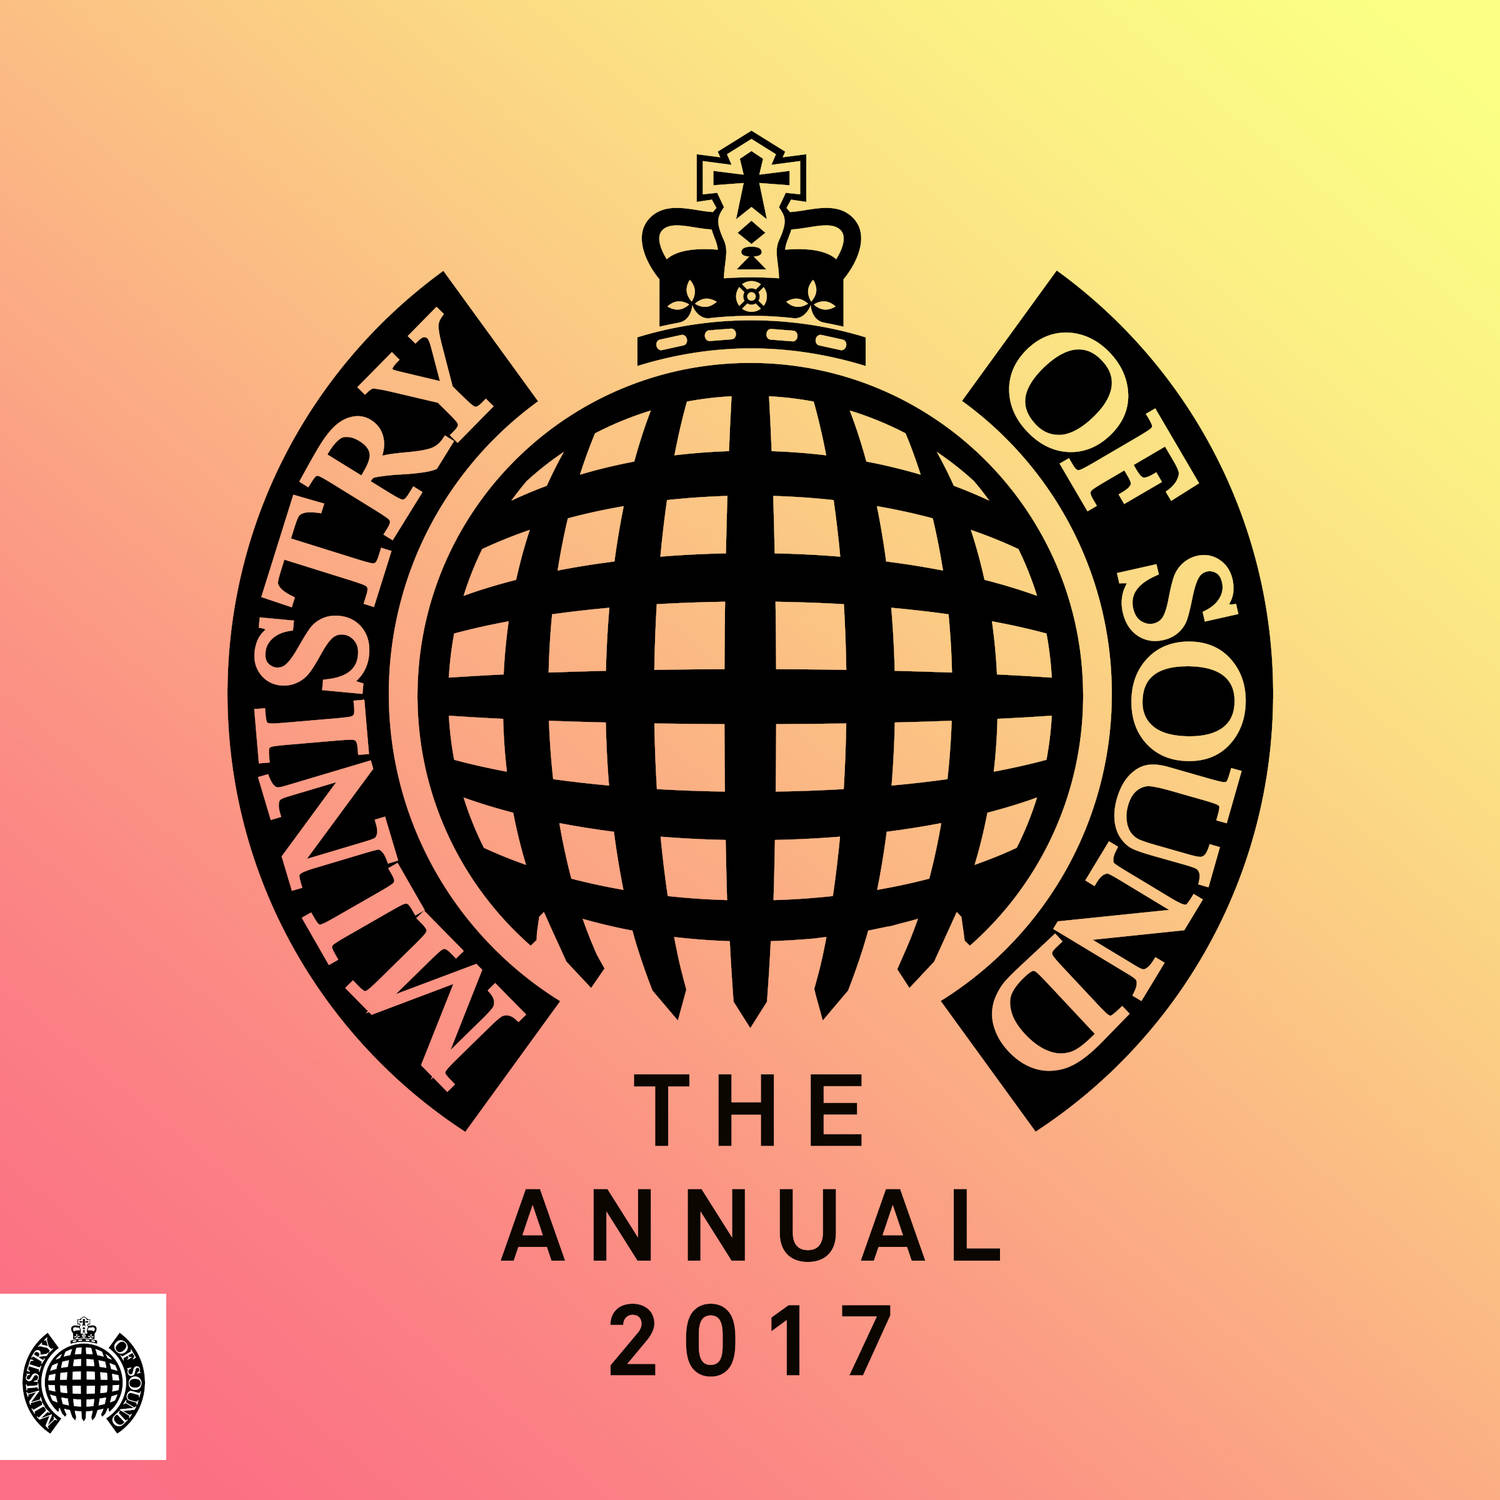 The Annual 2017 - Ministry of Sound